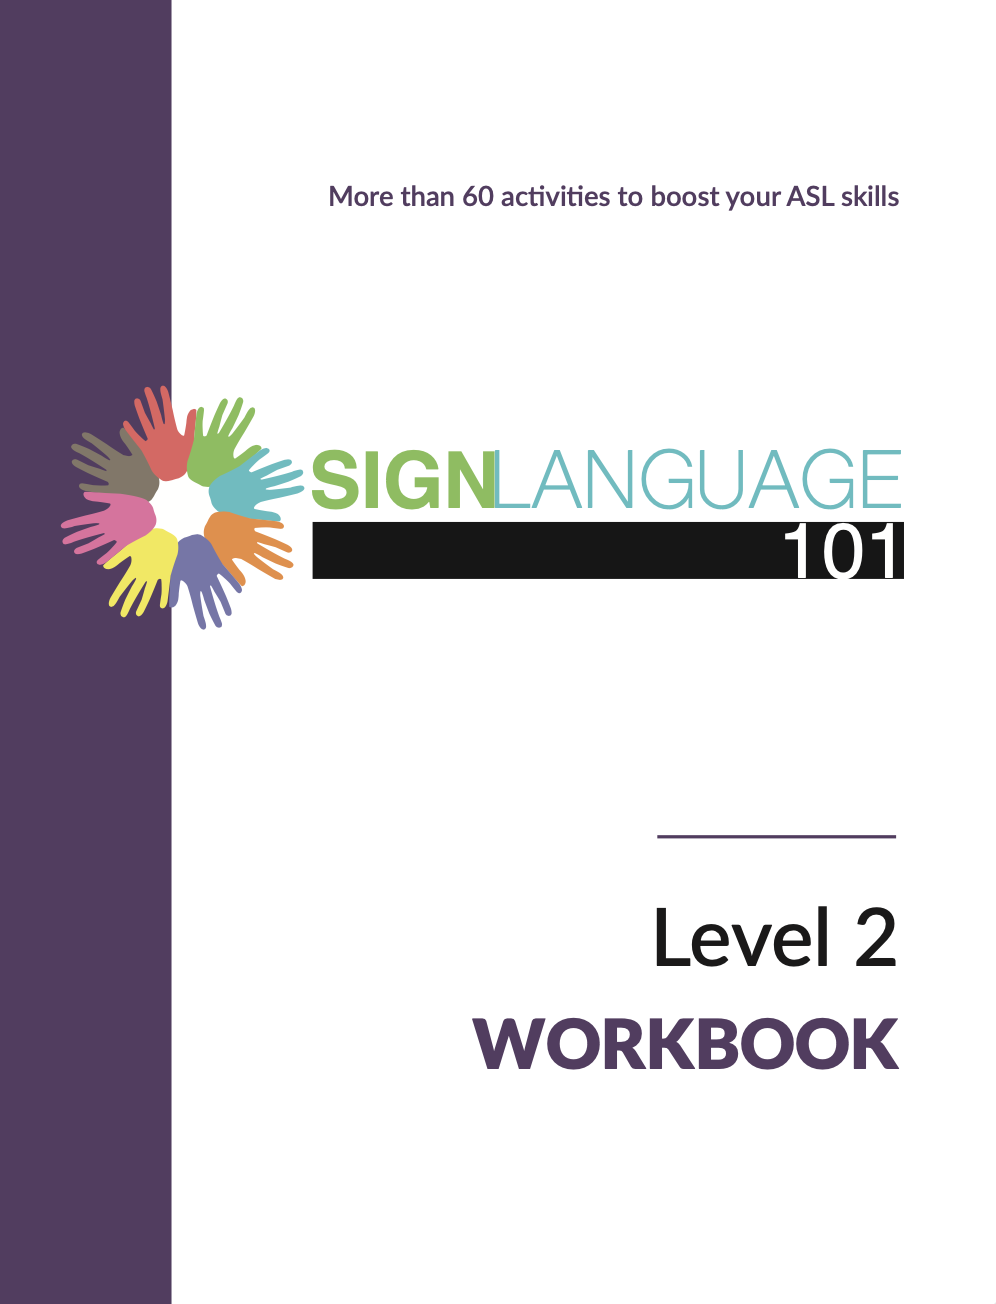 Sign Language 101 ASL Level 2 Course workbook cover